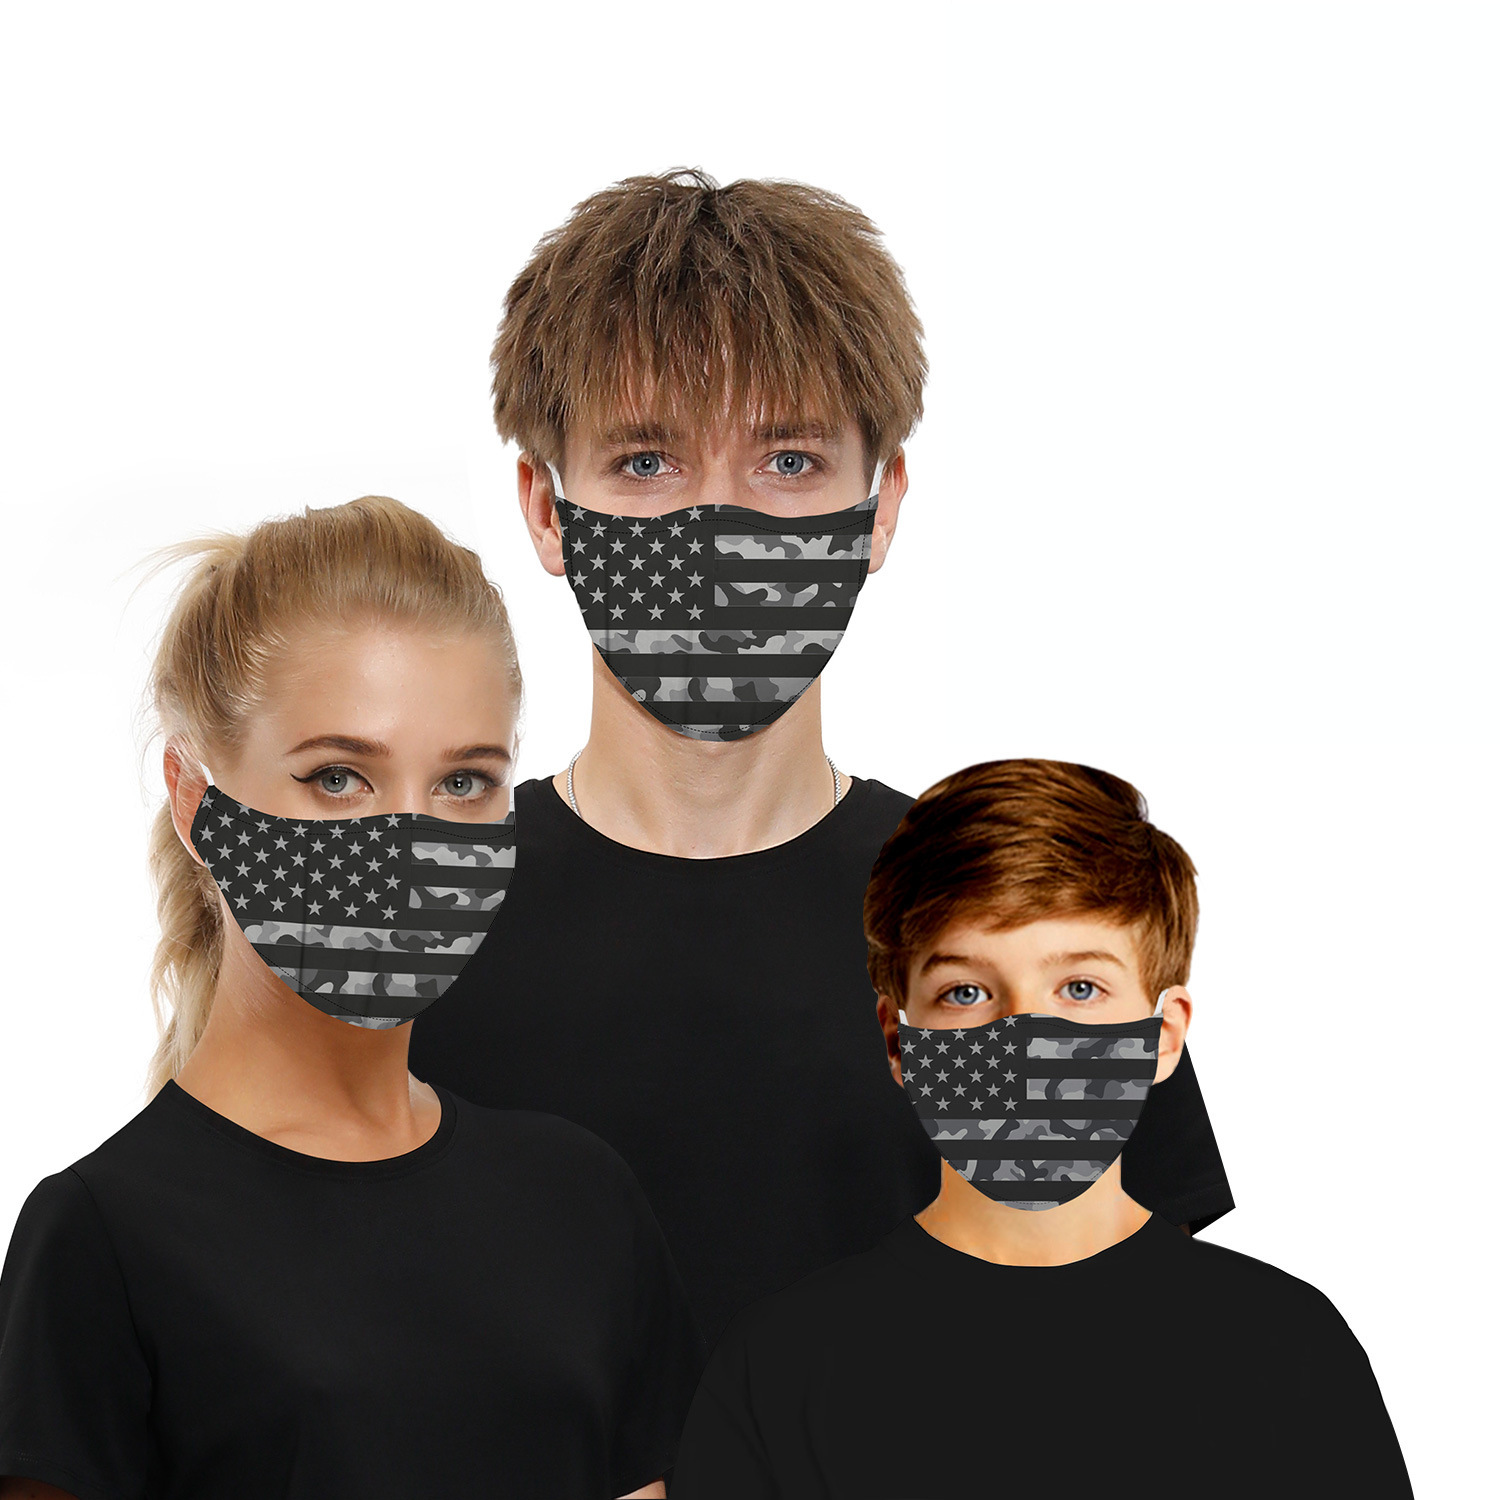 InkDigital-series-Double-Chip-Anti-PM25-Dust-proof-Face-Mask-Breathable-Protective-Mask-Windproof-Fo-1664842-11